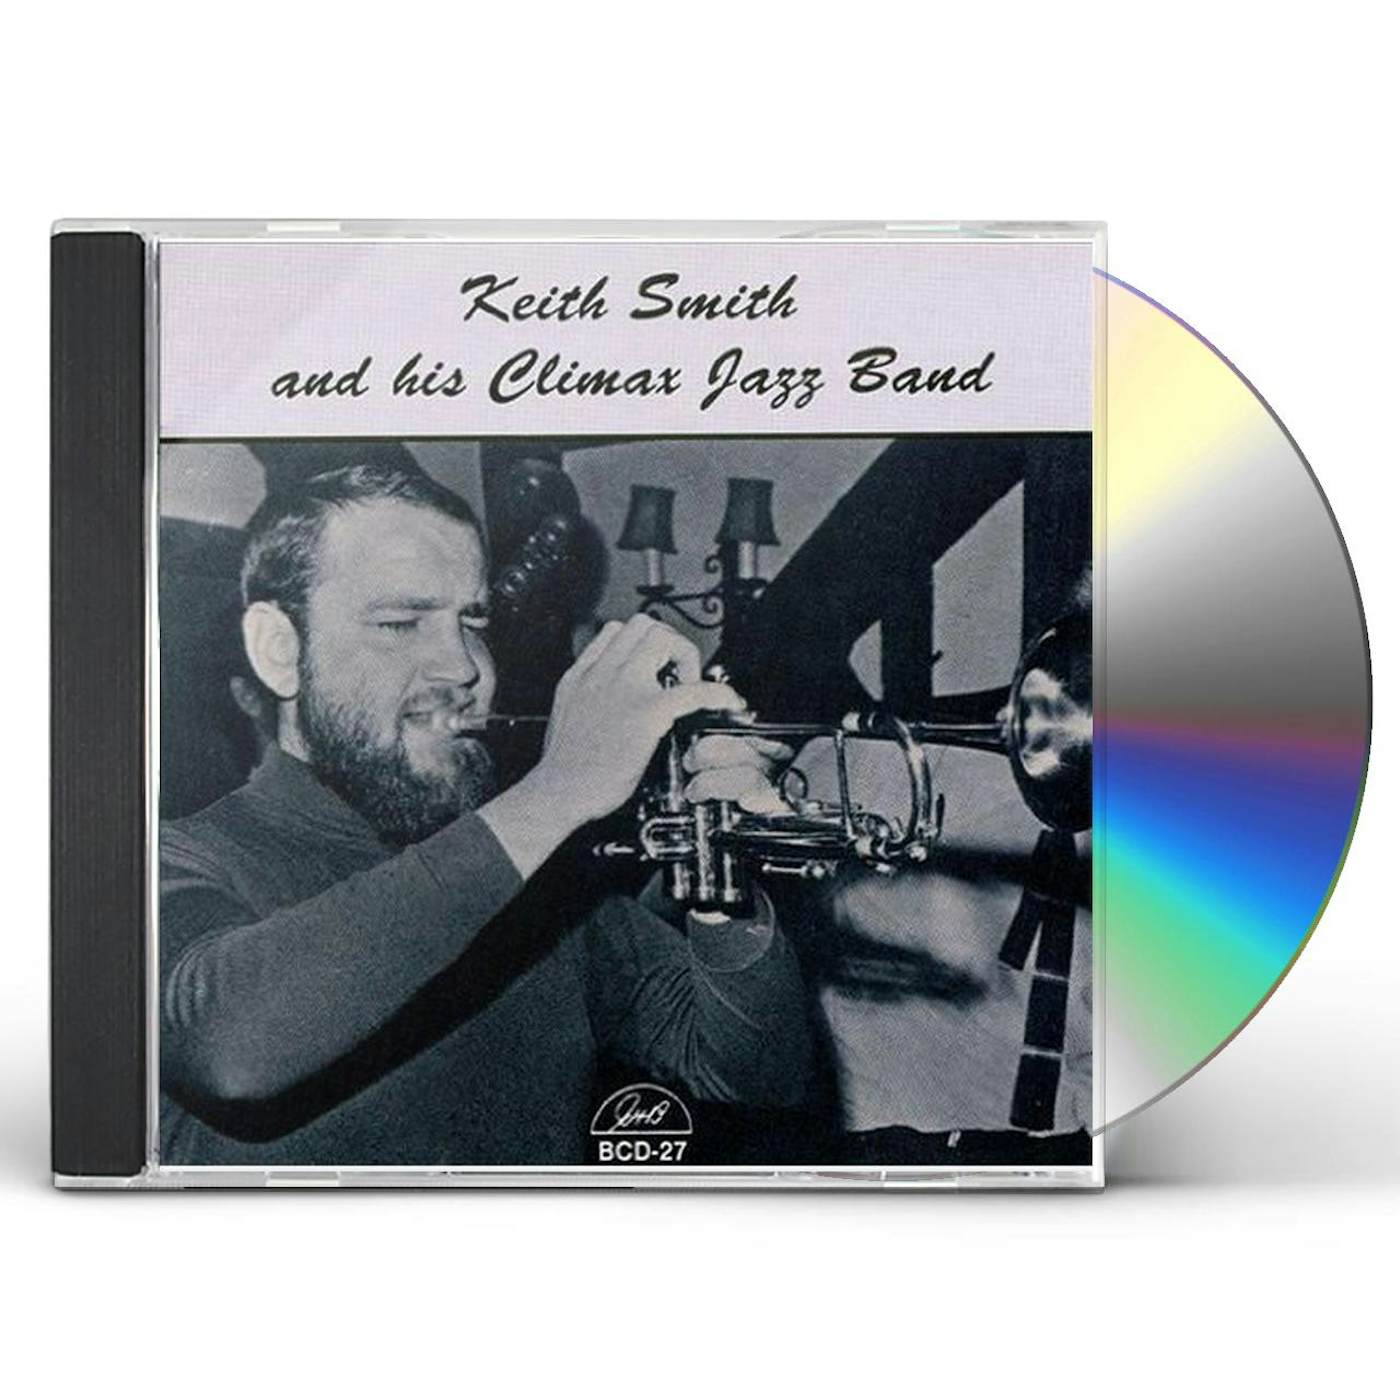 Keith Smith HIS CLIMAX JAZZ BAND CD